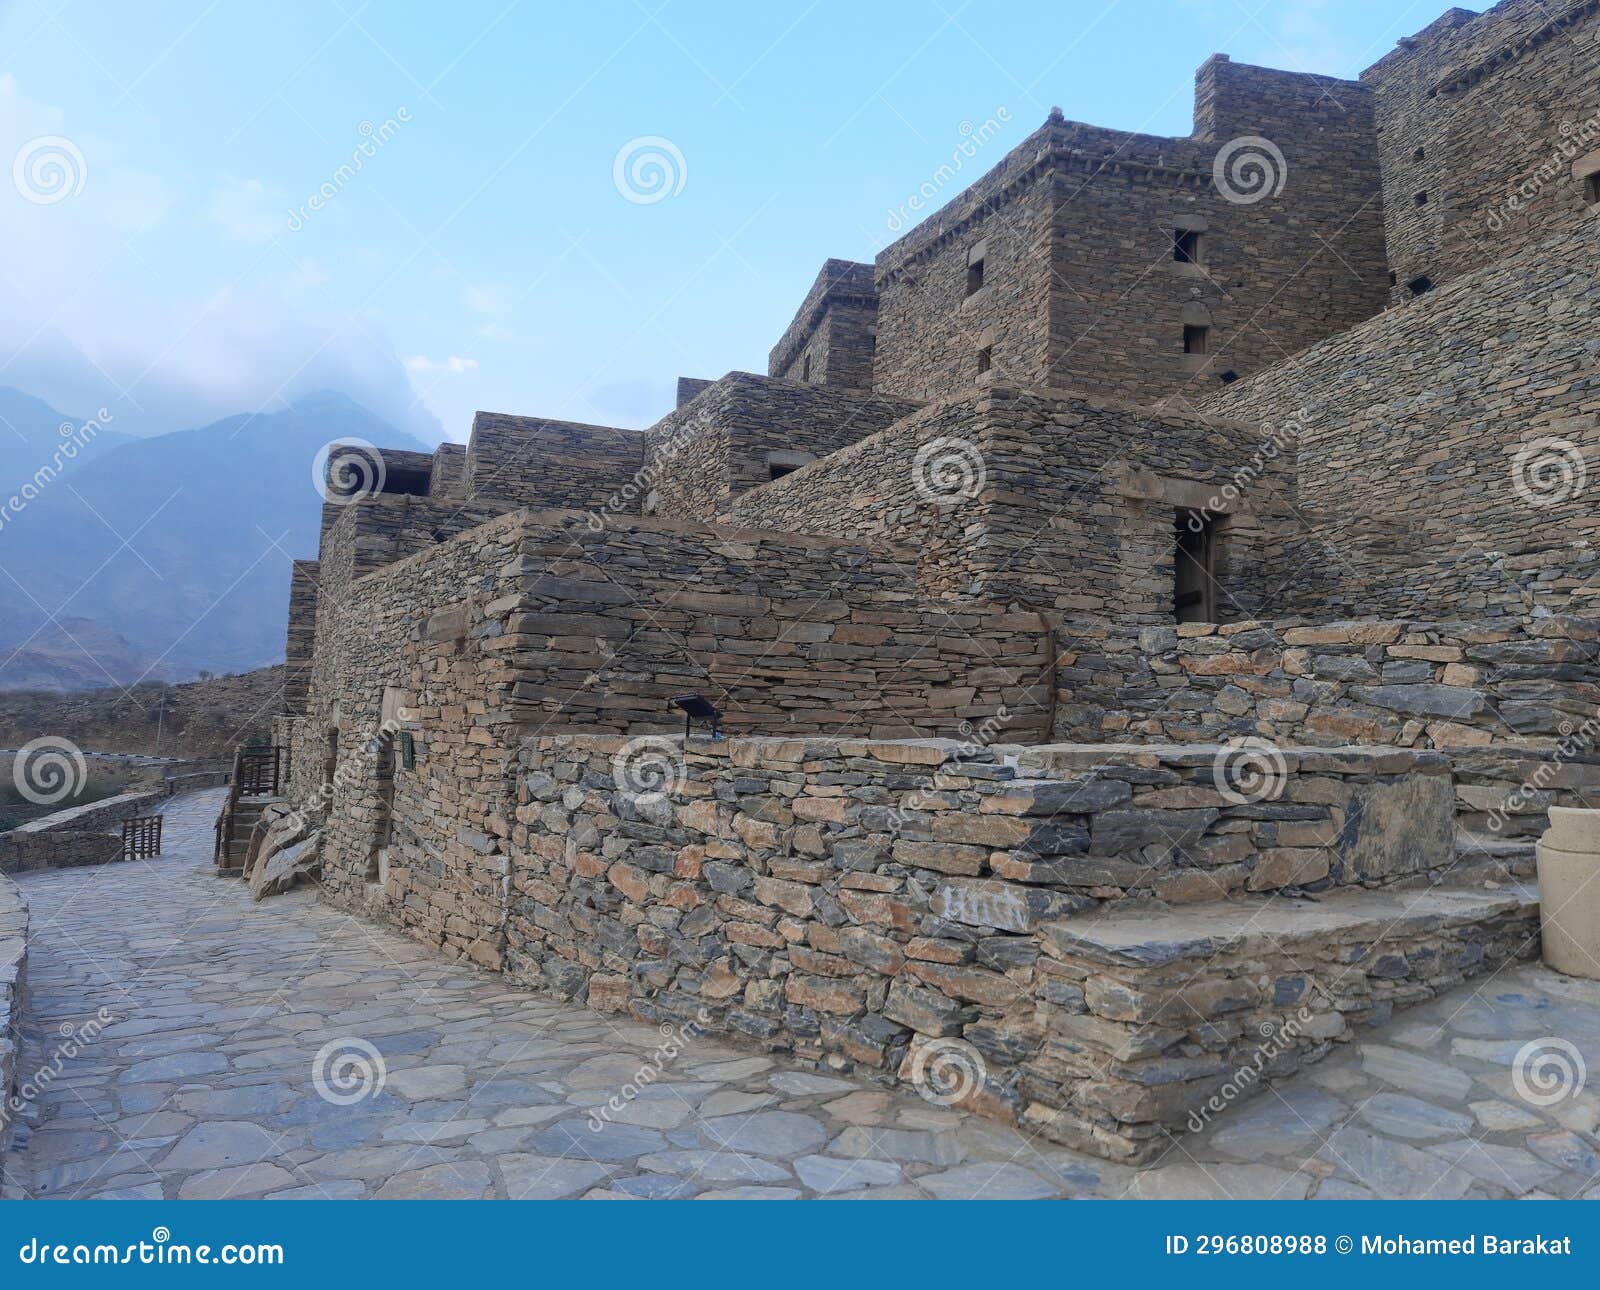 saudi arabia, al-baha, the ancient heritage village of thee ain( zee ain), houses, mosques, towers and forts